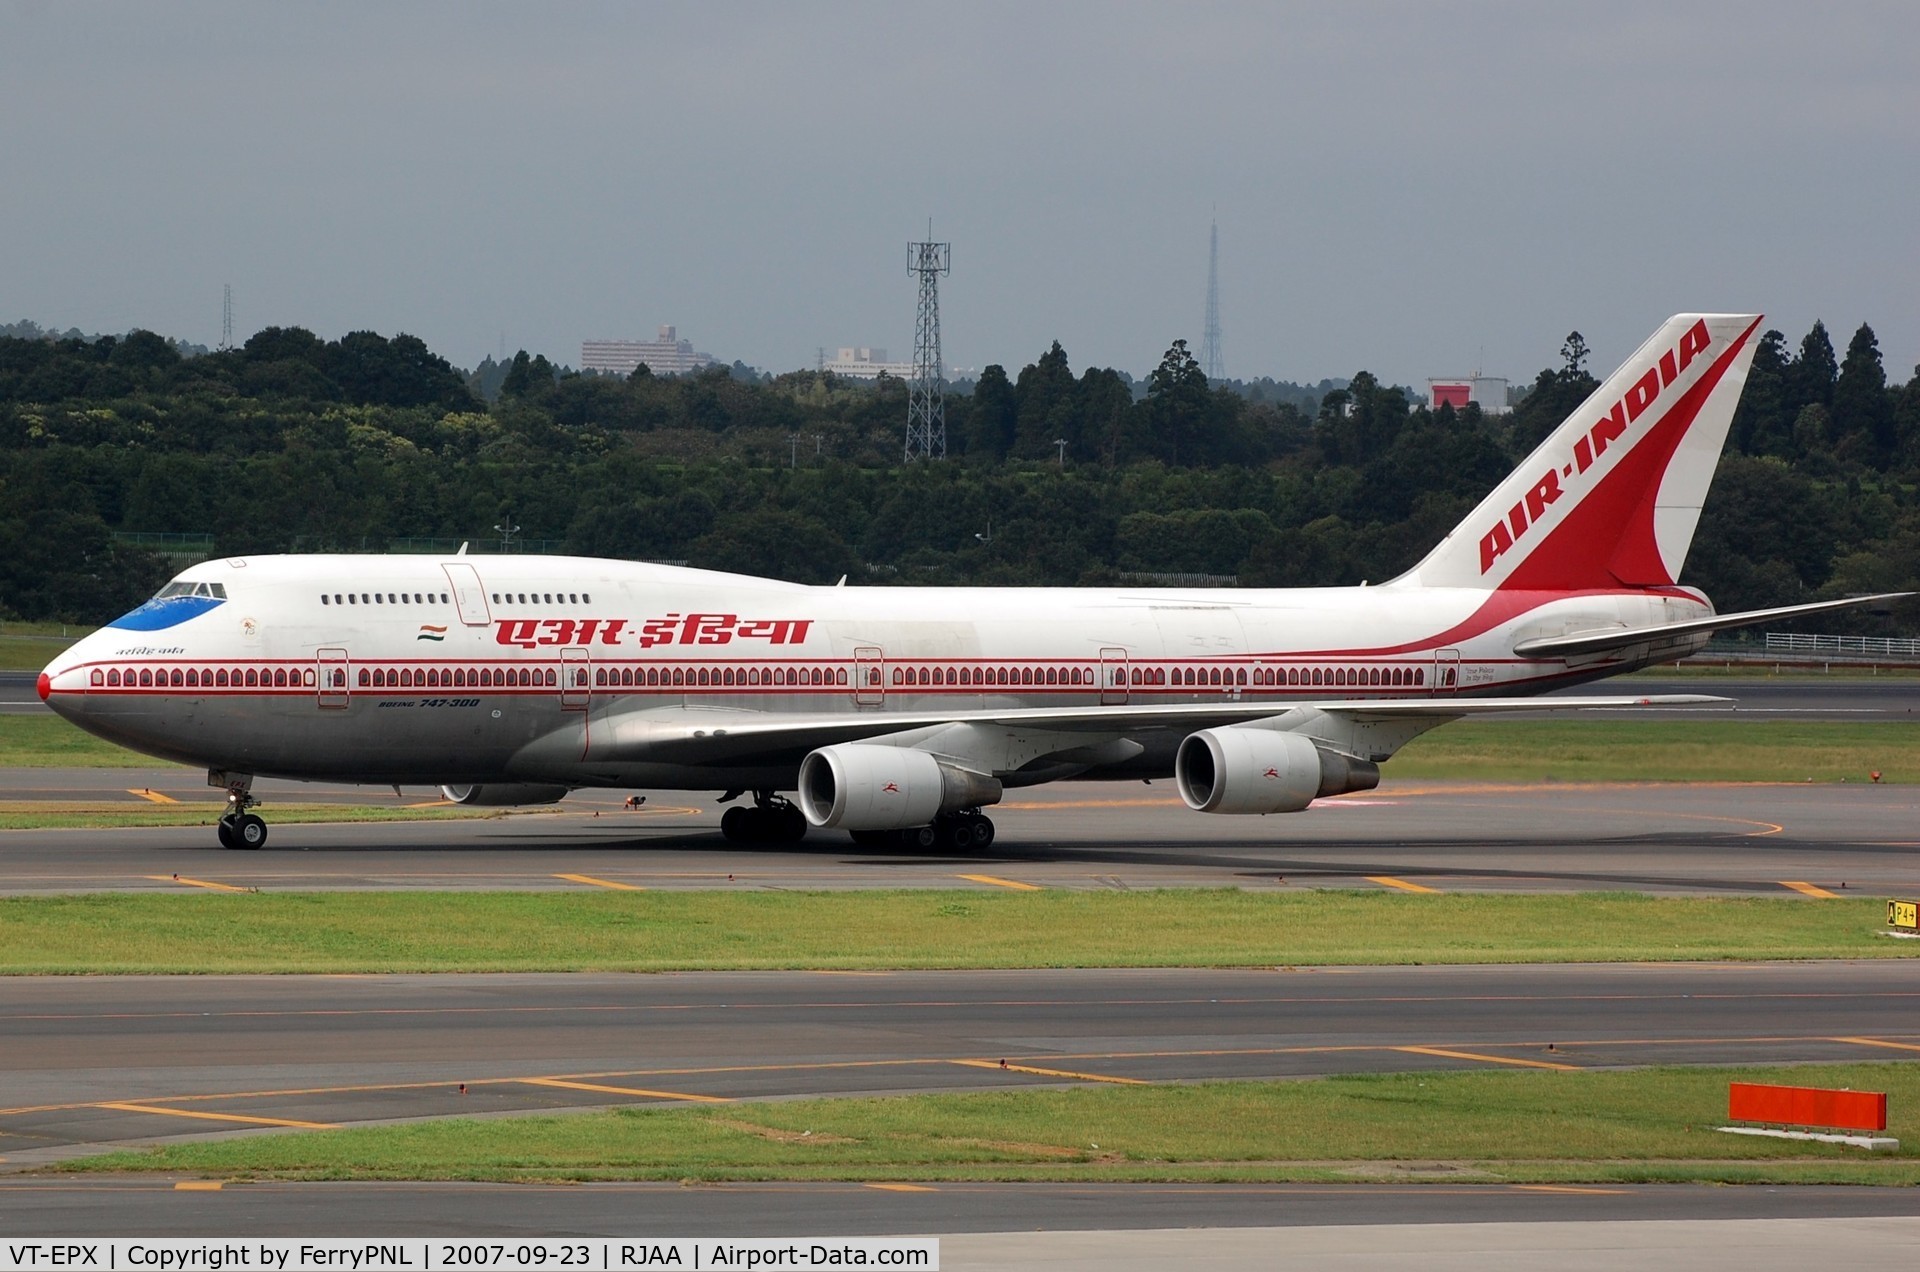 VT-EPX, 1988 Boeing 747-337 C/N 24160, Air India vacating the runway